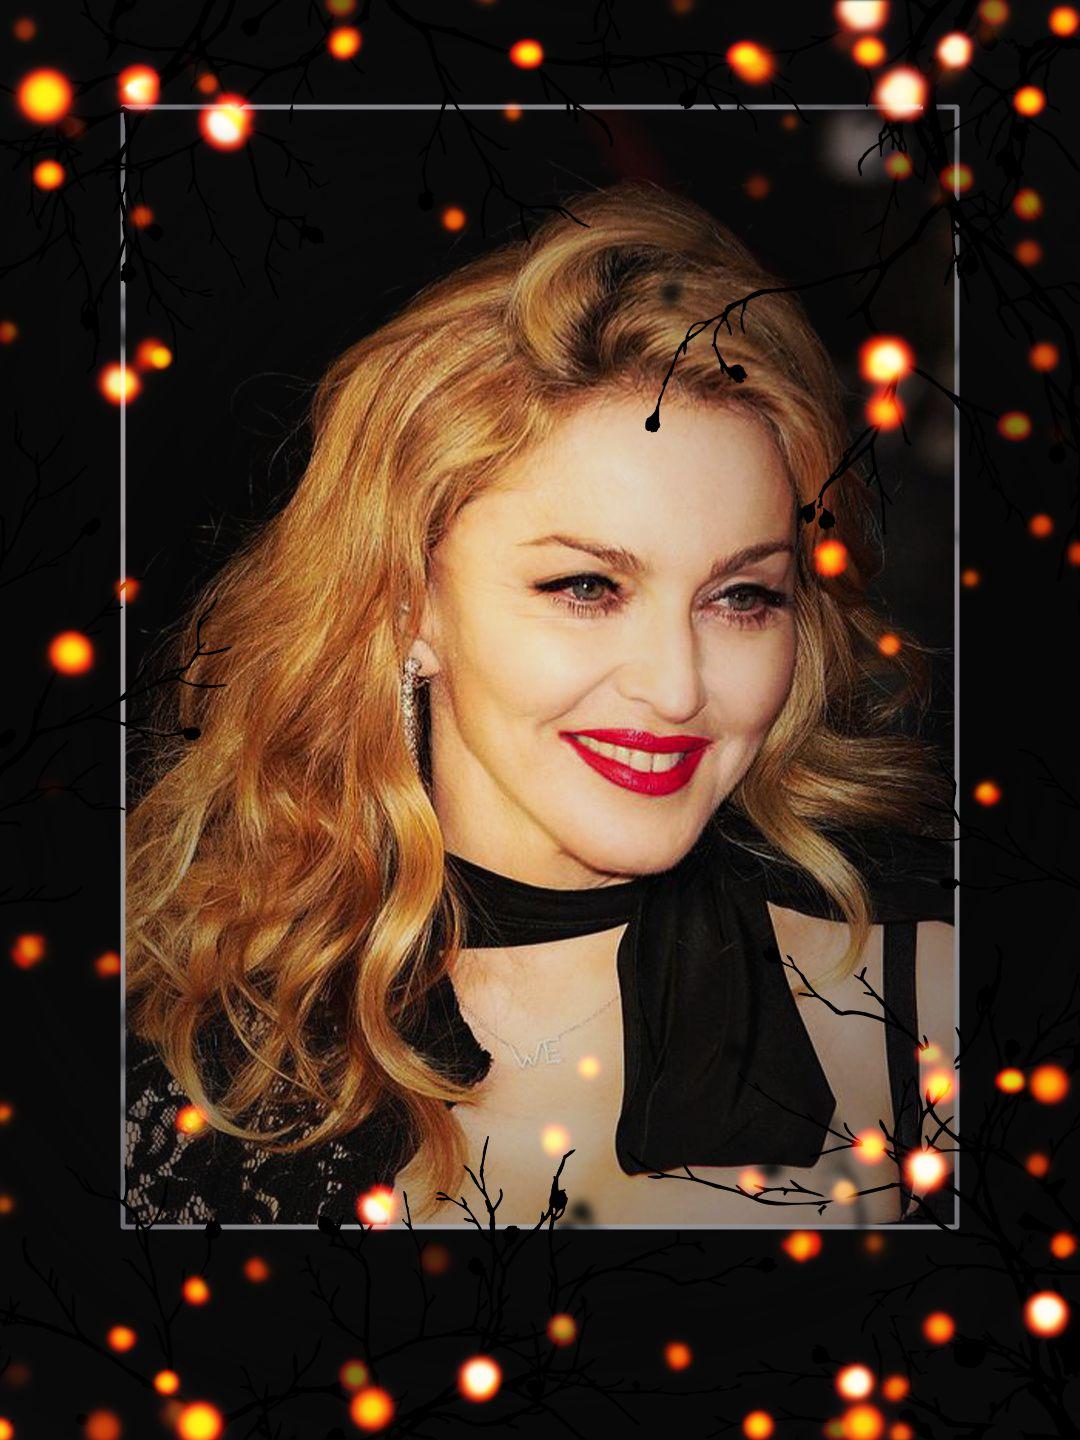 Notty Amrica Mom Rape Hq - Madonna # 41 - Celeb ART - Beautiful Artworks of Celebrities, Footballers,  Politicians and Famous People in World | OpenSea